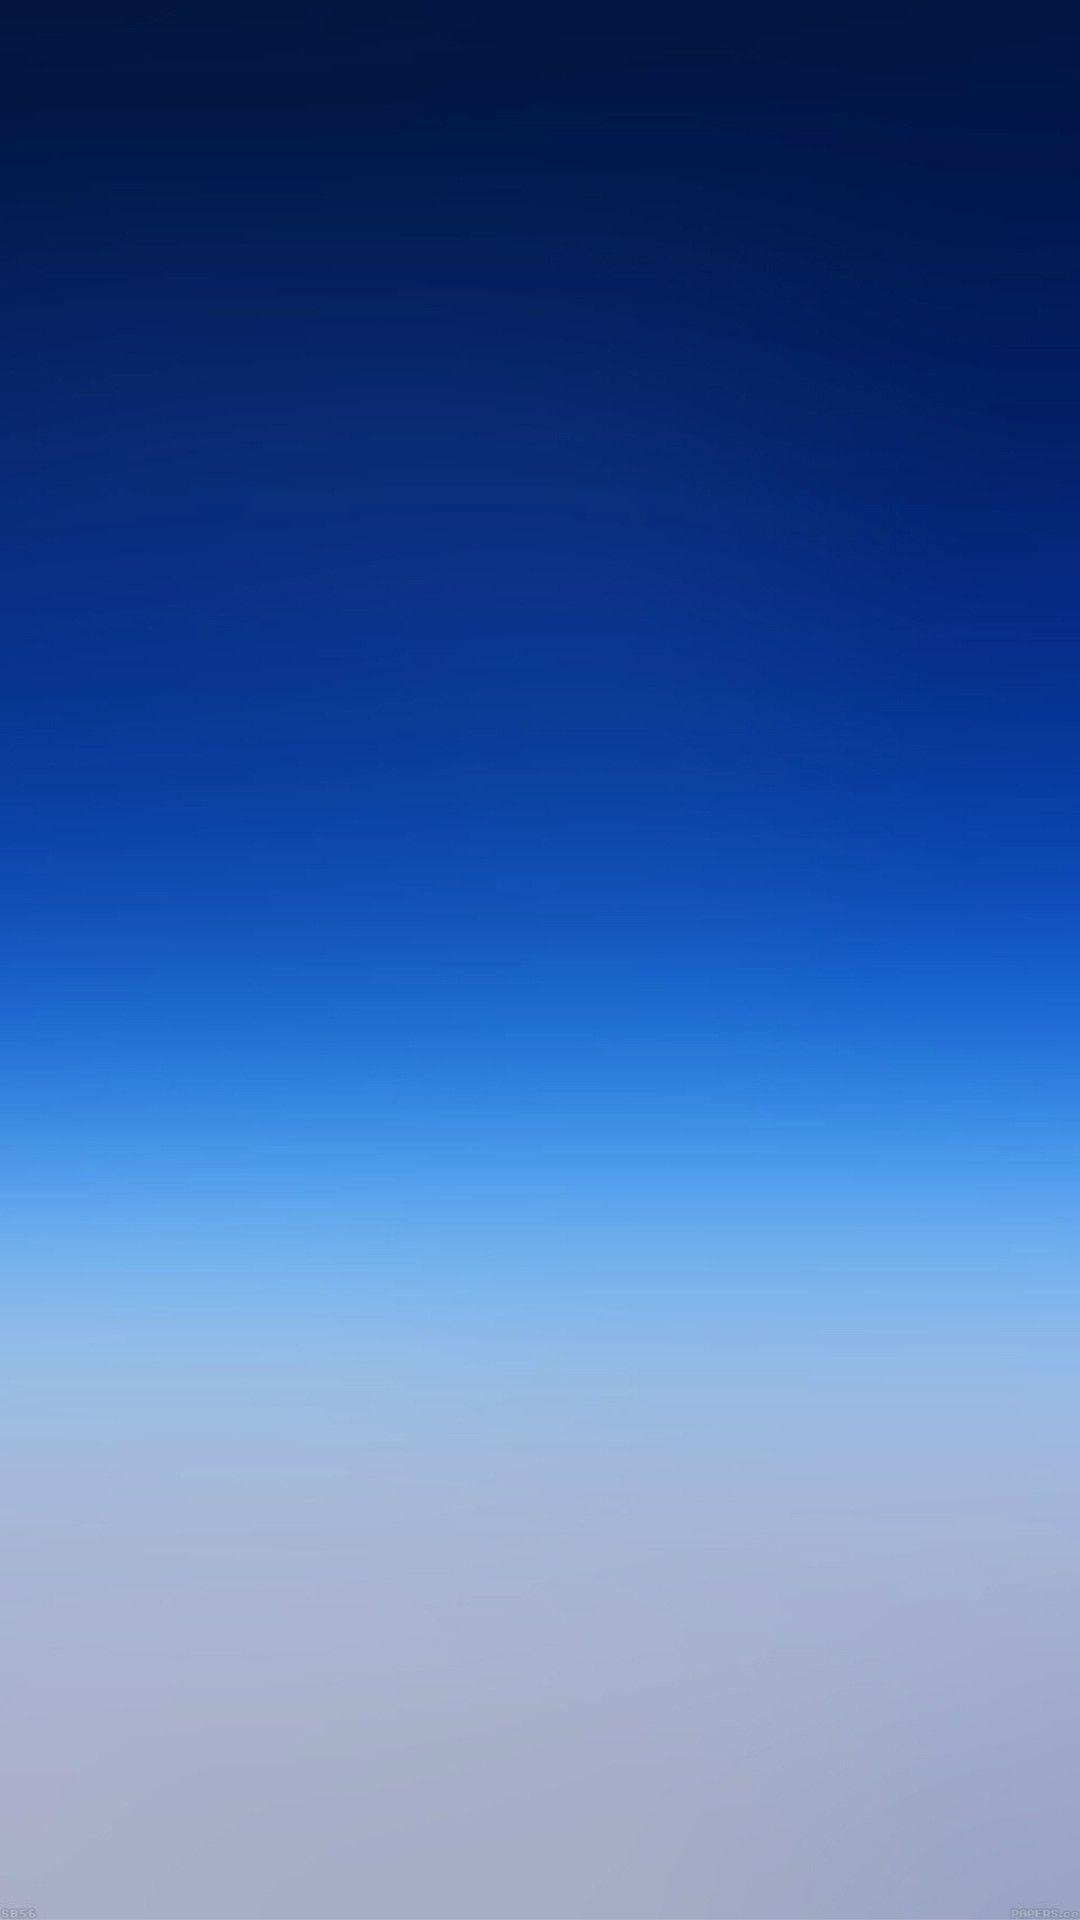 2560x1440 Sea Blue Solid Color Background